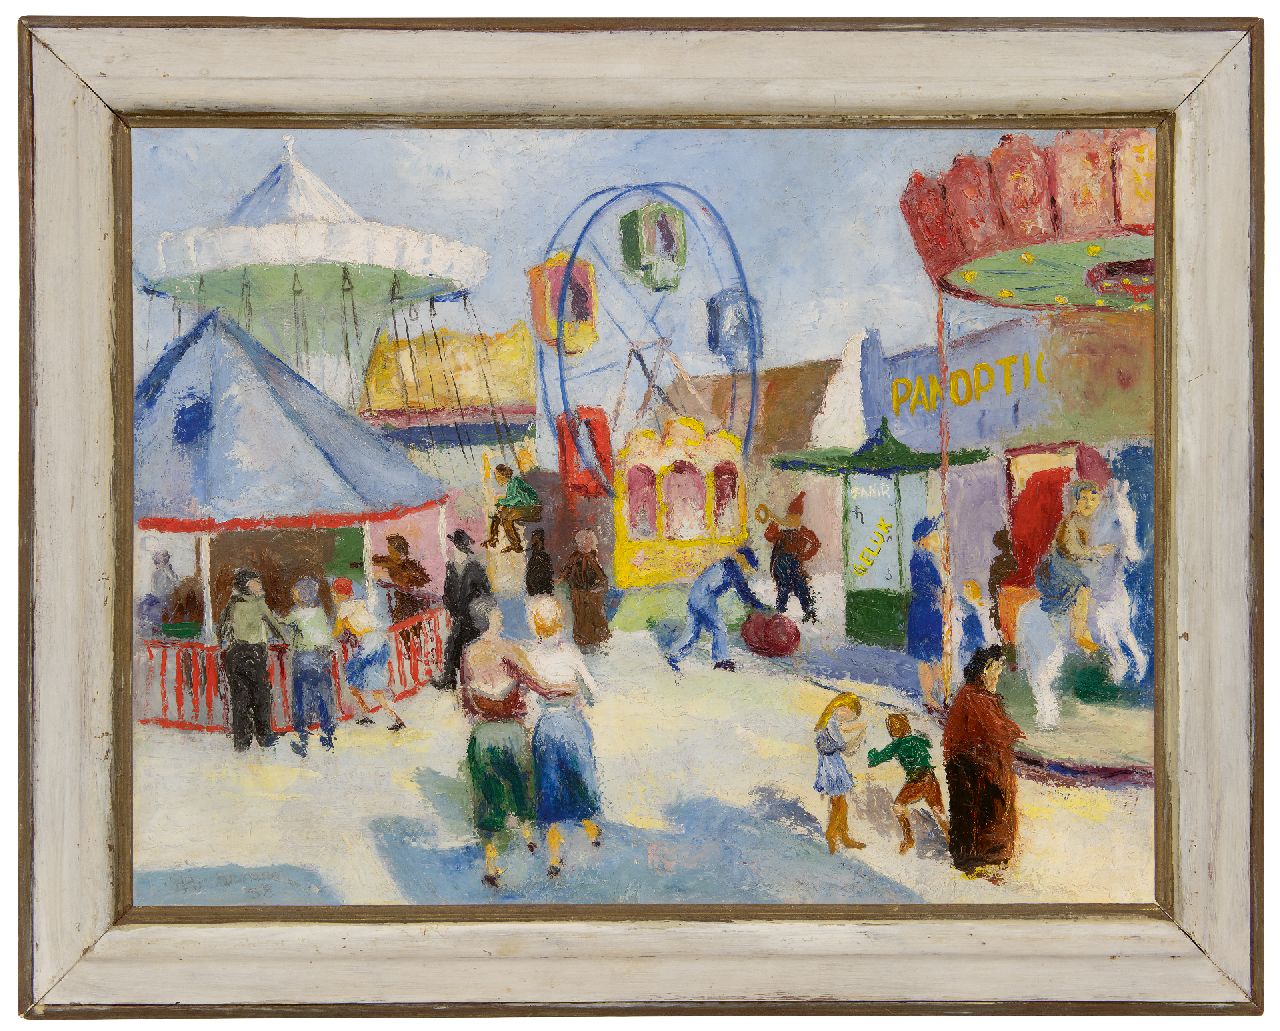 Hesterman F.C.  | F.C. Hesterman | Paintings offered for sale | The fair, oil on canvas 45.7 x 60.4 cm, signed l.l. and dated '38